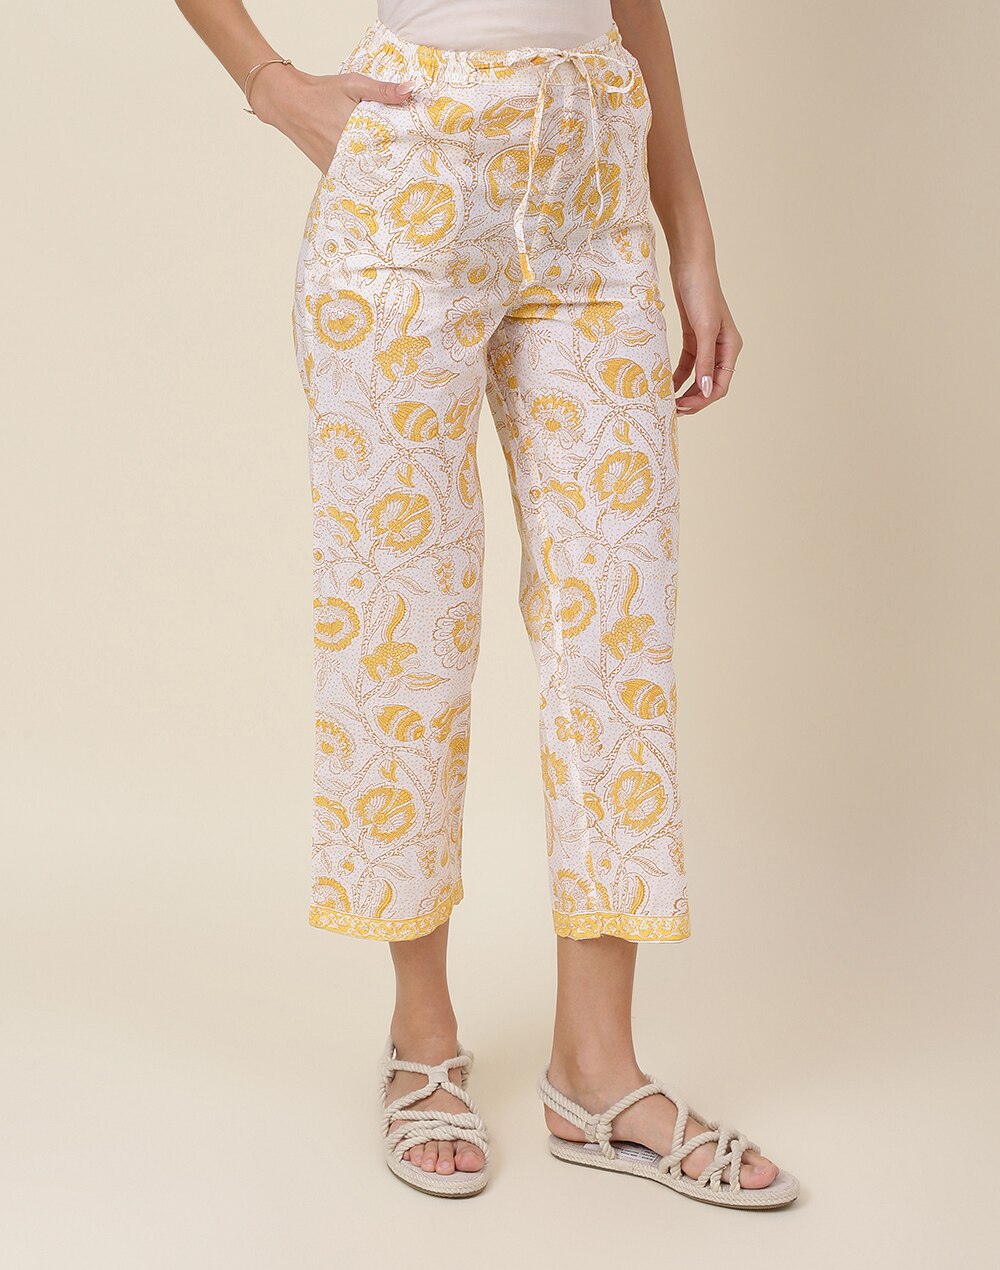 Cotton Printed Casual Pant